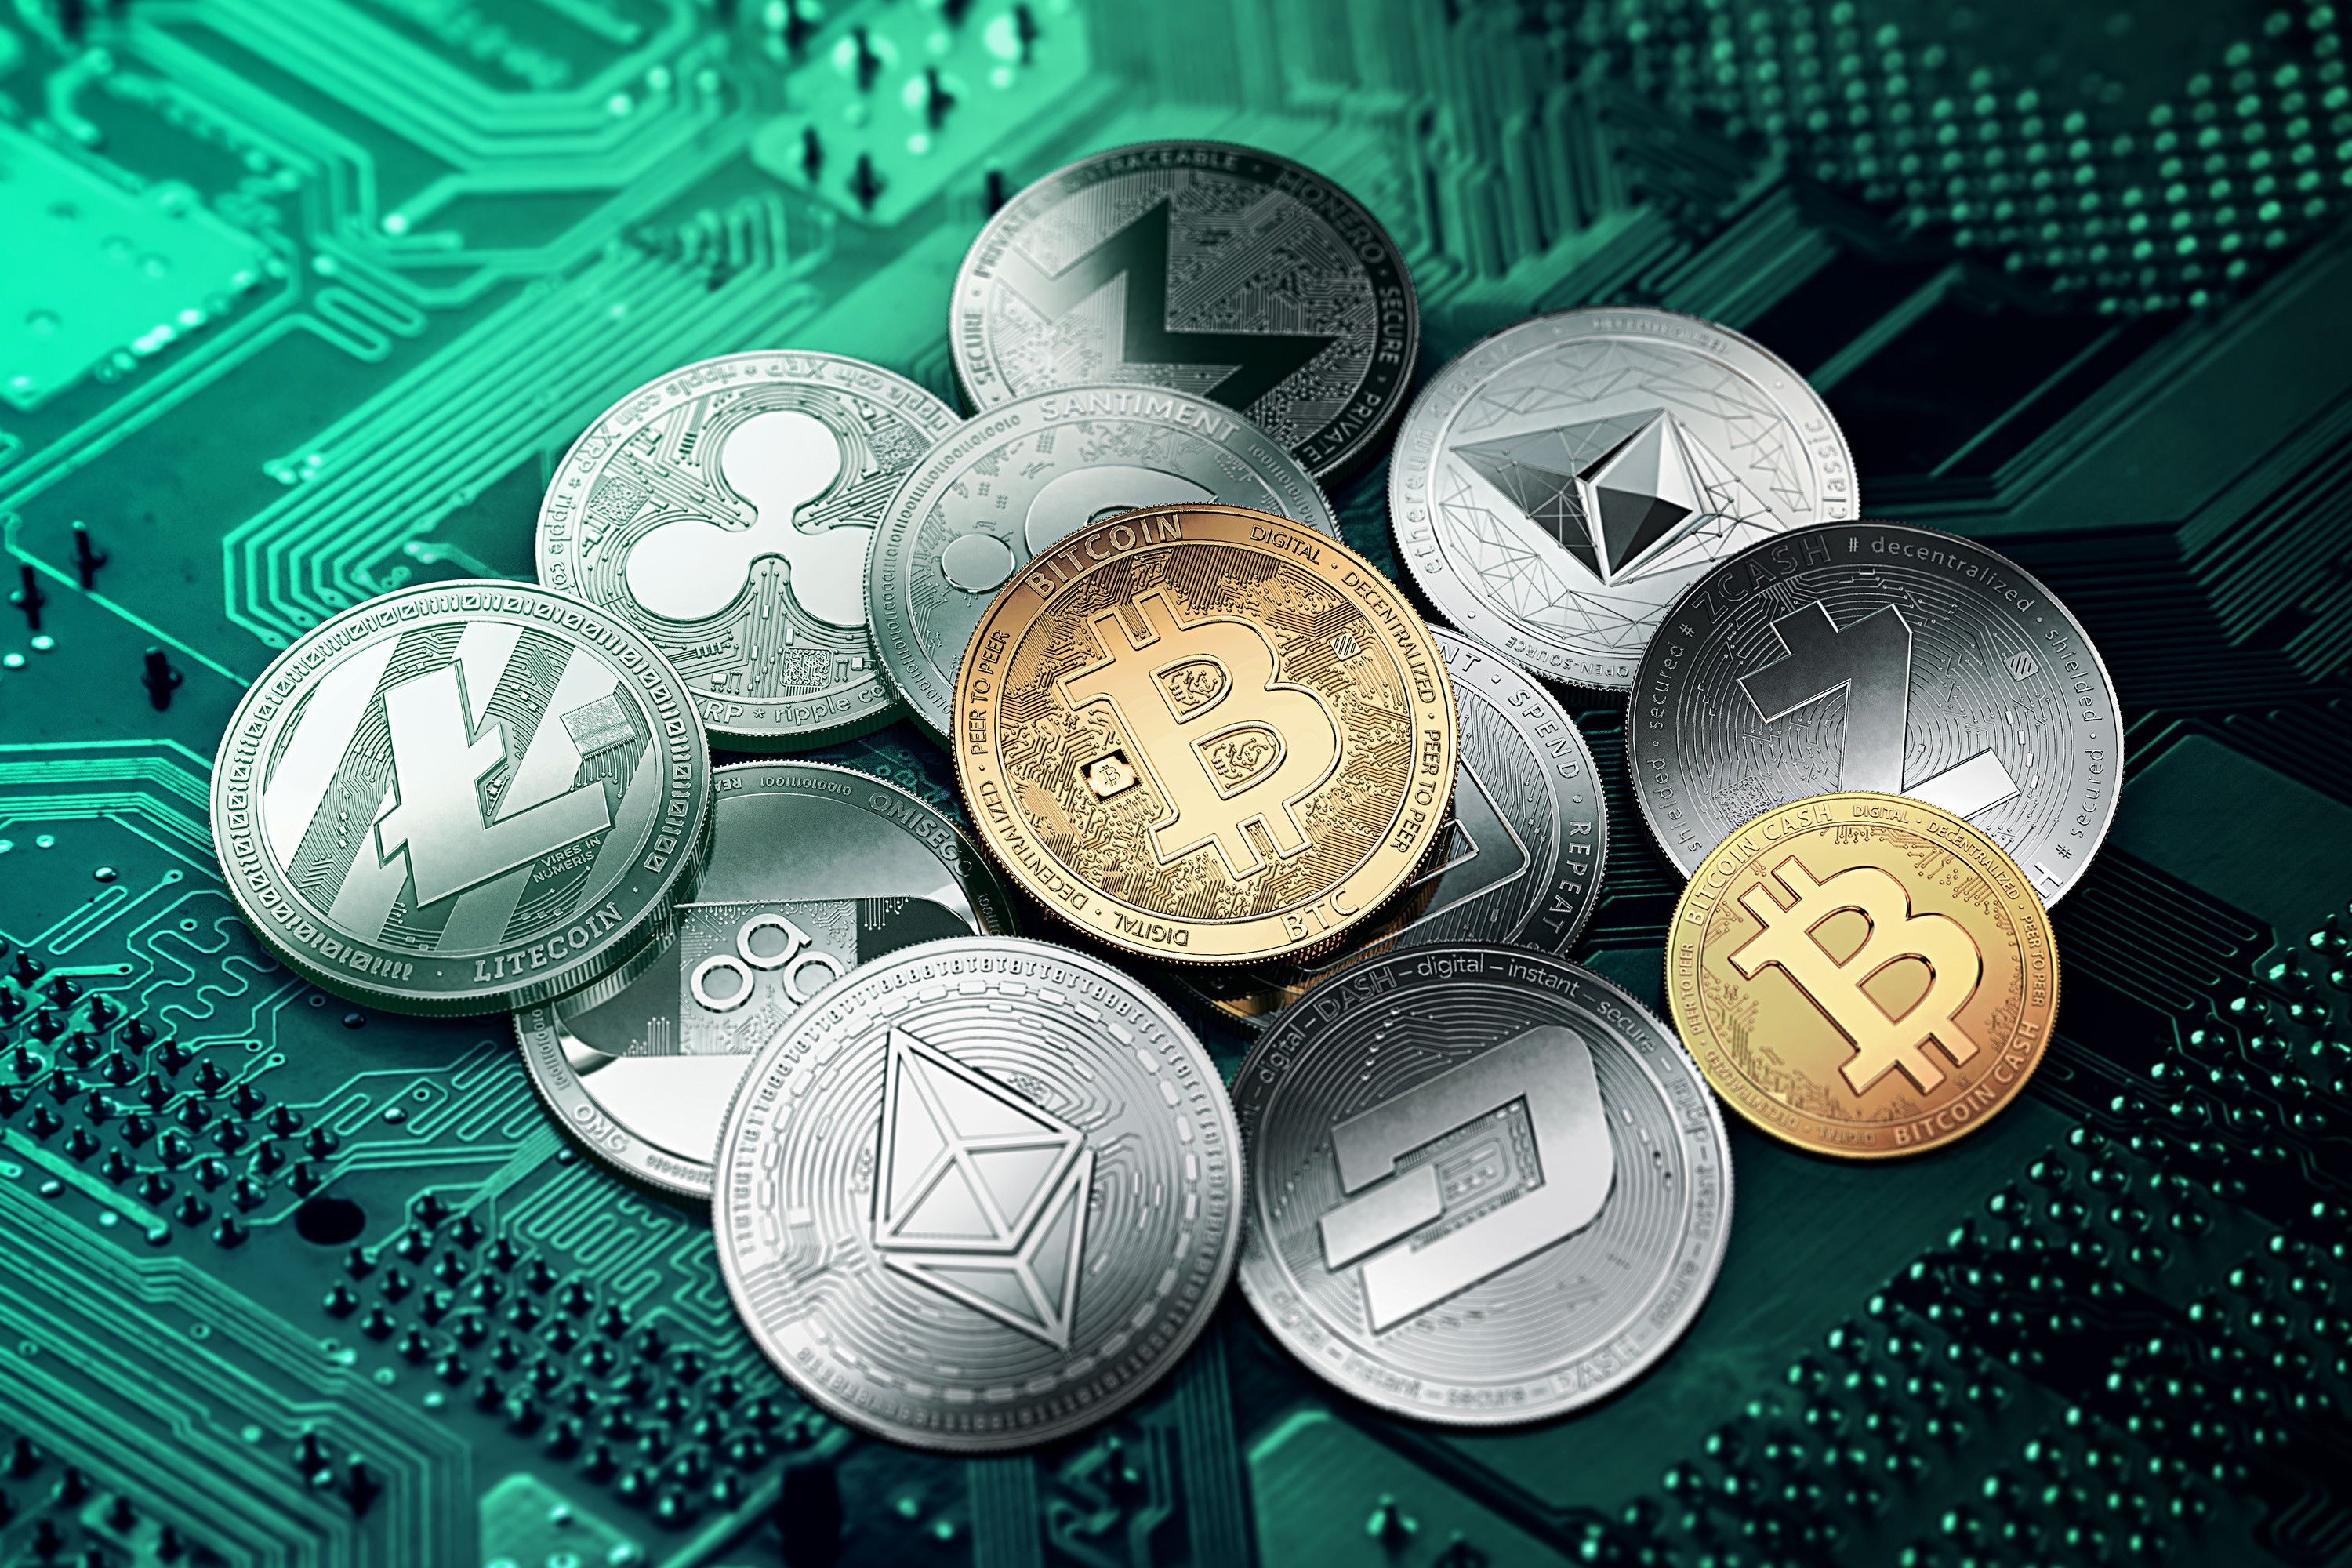 Buck cryptocurrency are virtual currencies synonomous with cryptocurrencies